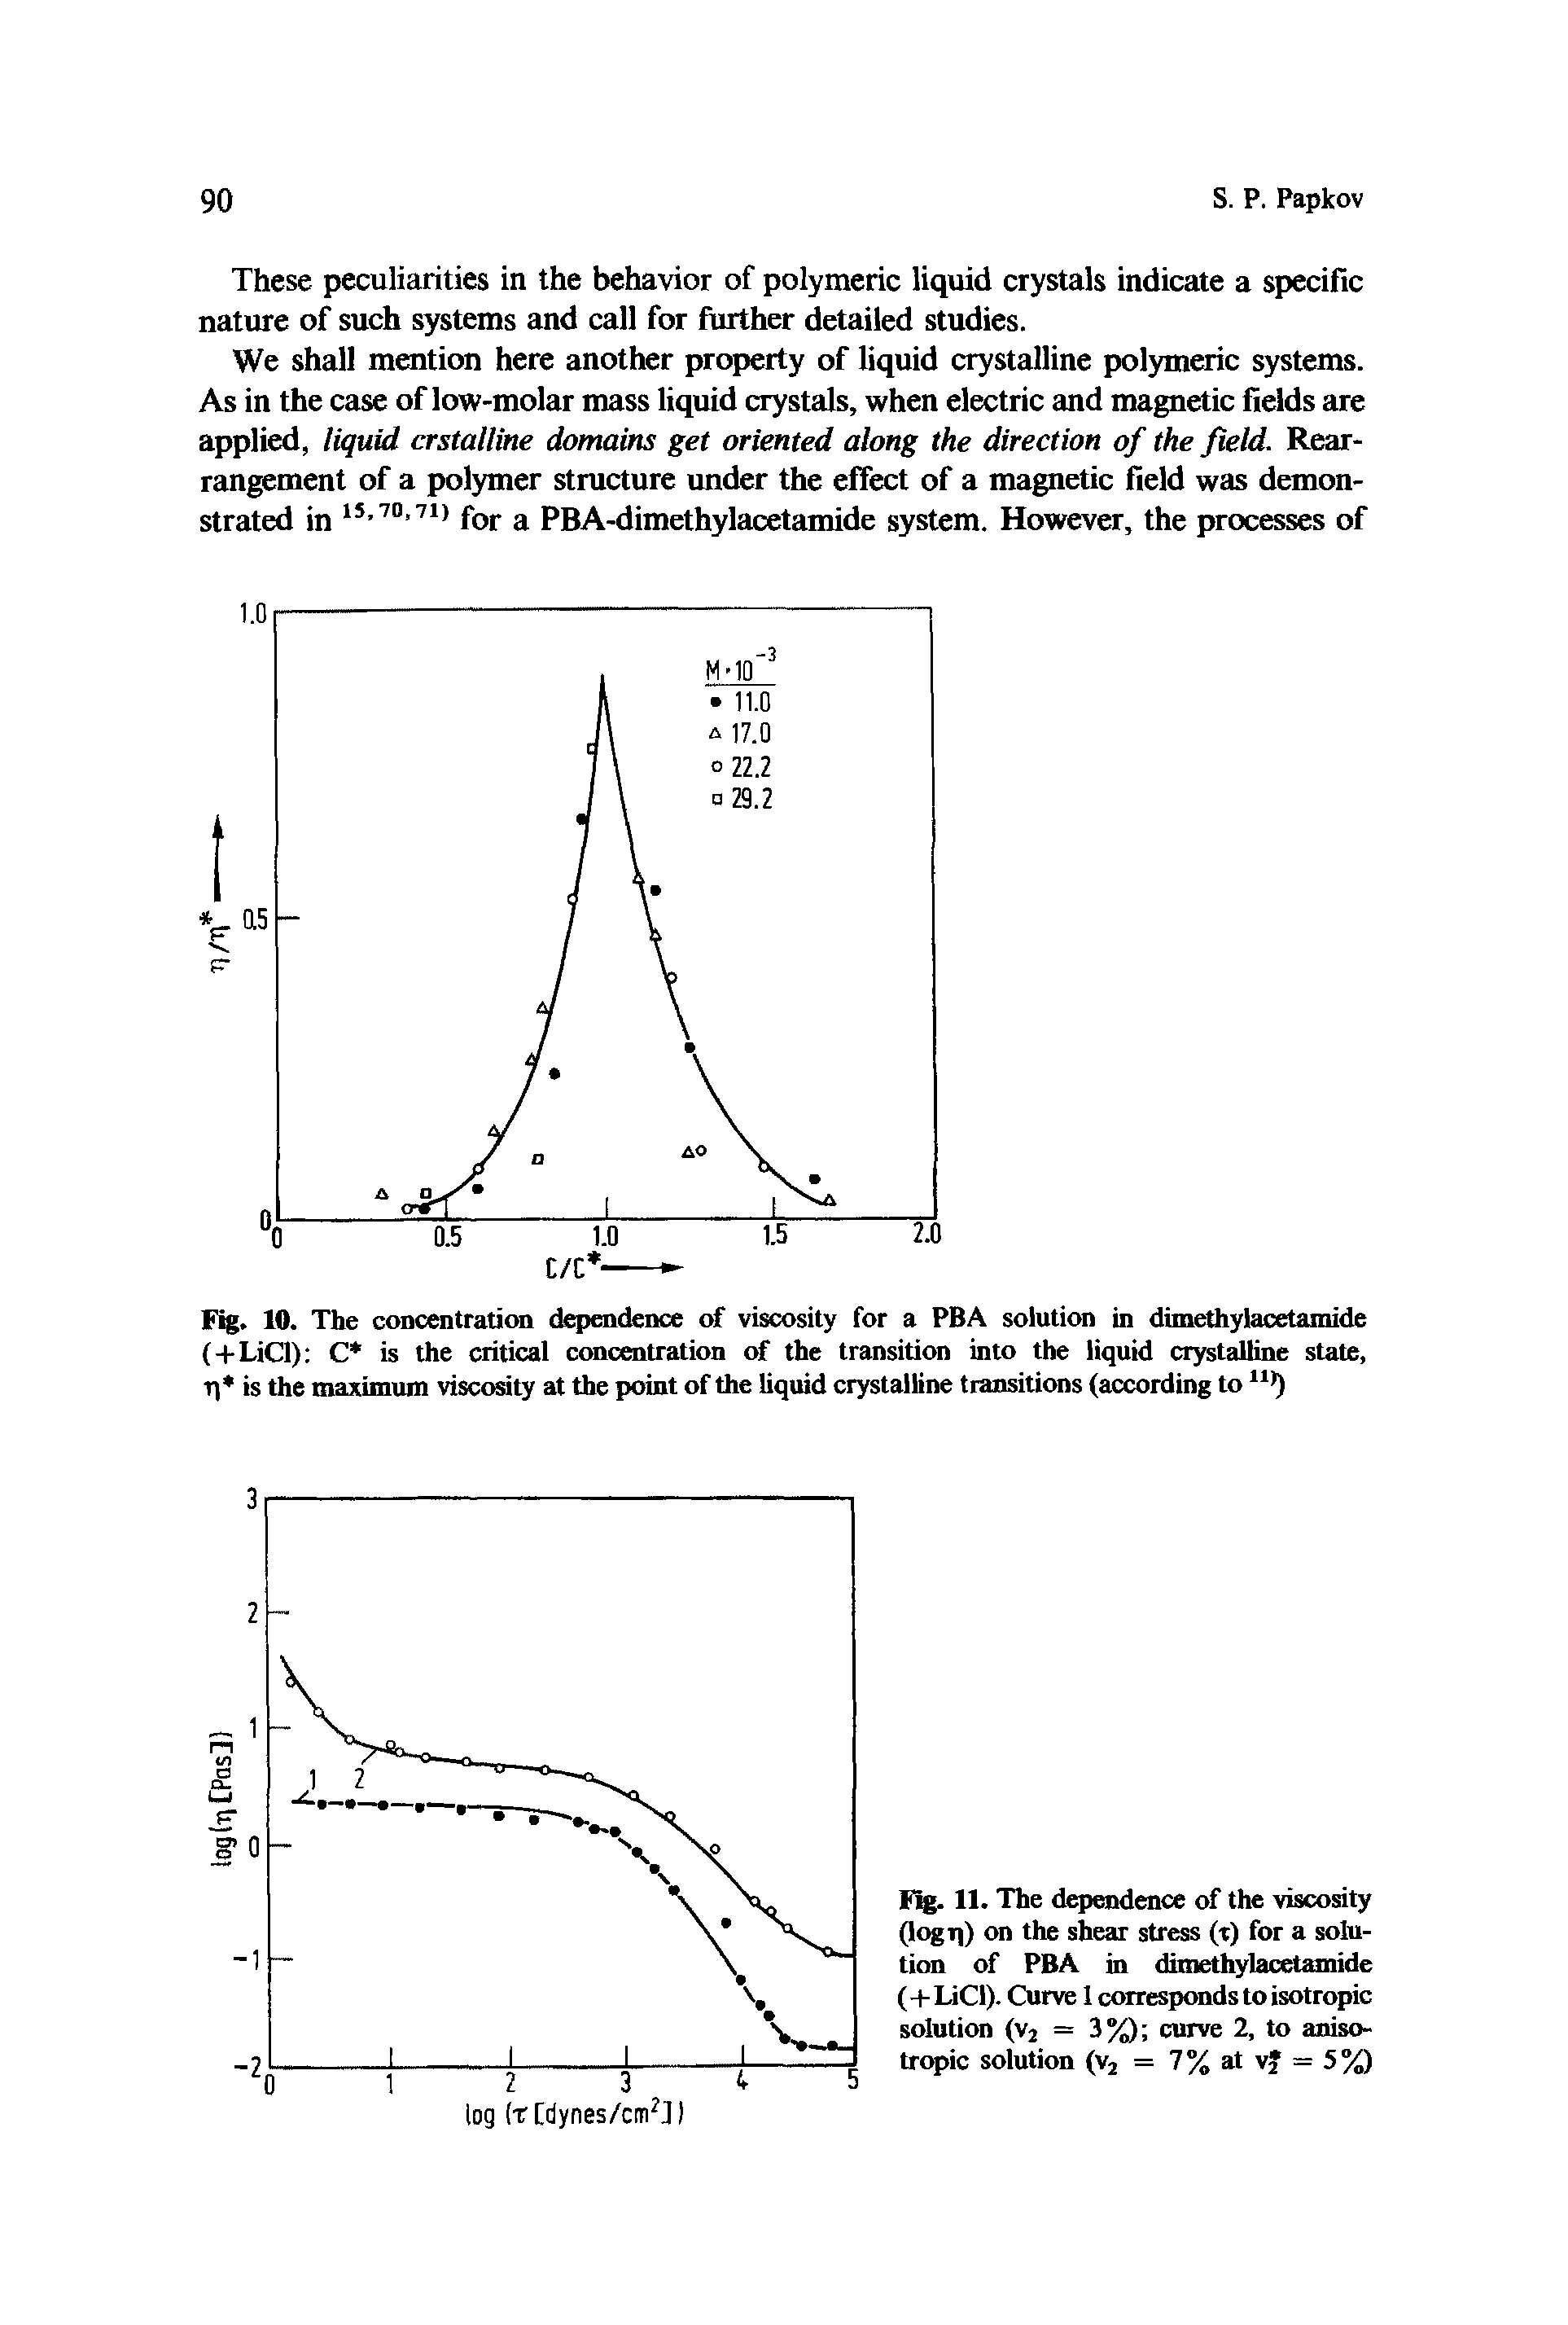 Fig. 10. The concentration dependence of viscosity for a PBA solution in dimethylacetamide (-(-LiCl) C is the critical concentration of the transition into the liquid crystalline state, U is the maximum viscosity at the point of the liquid crystalline transitions (according to >)...